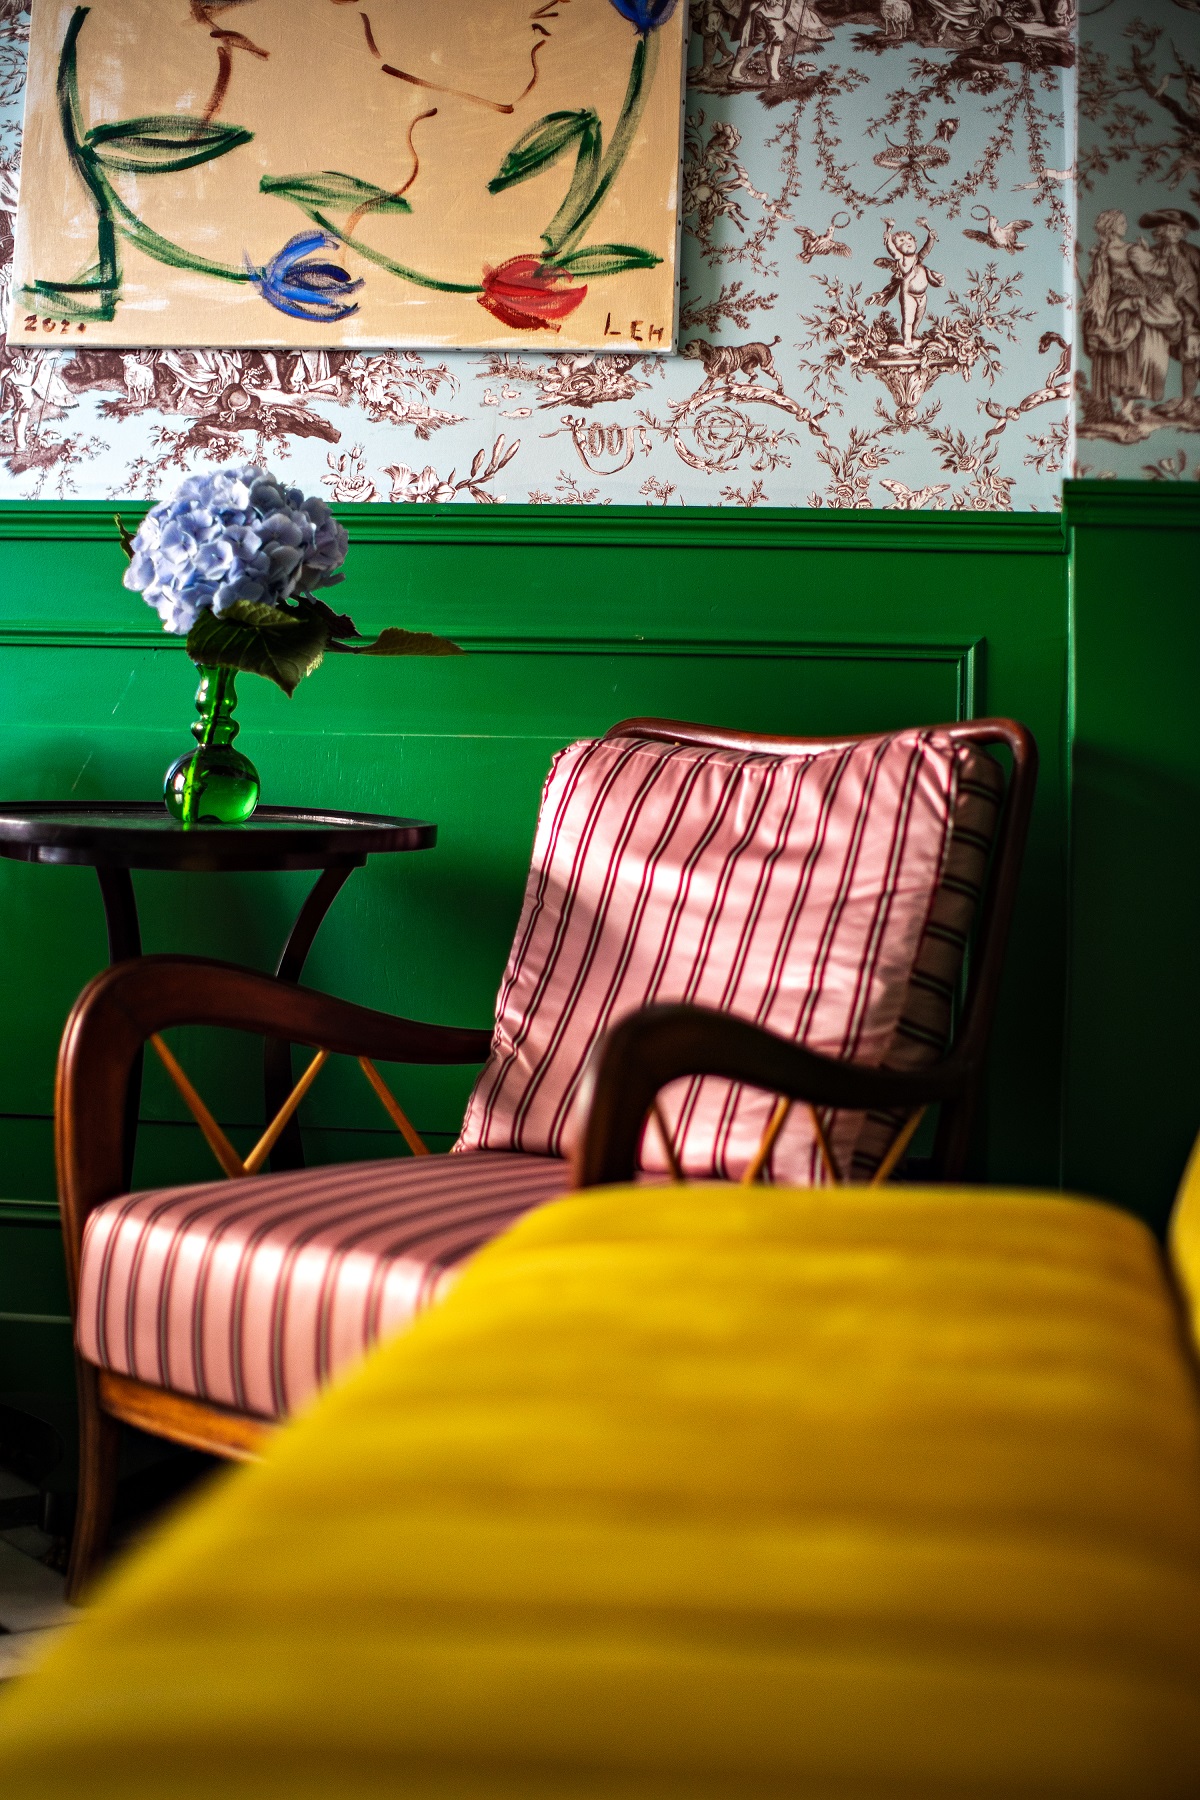 green wall, red stripe chair and yellow velvet in eclectic Paris hotel